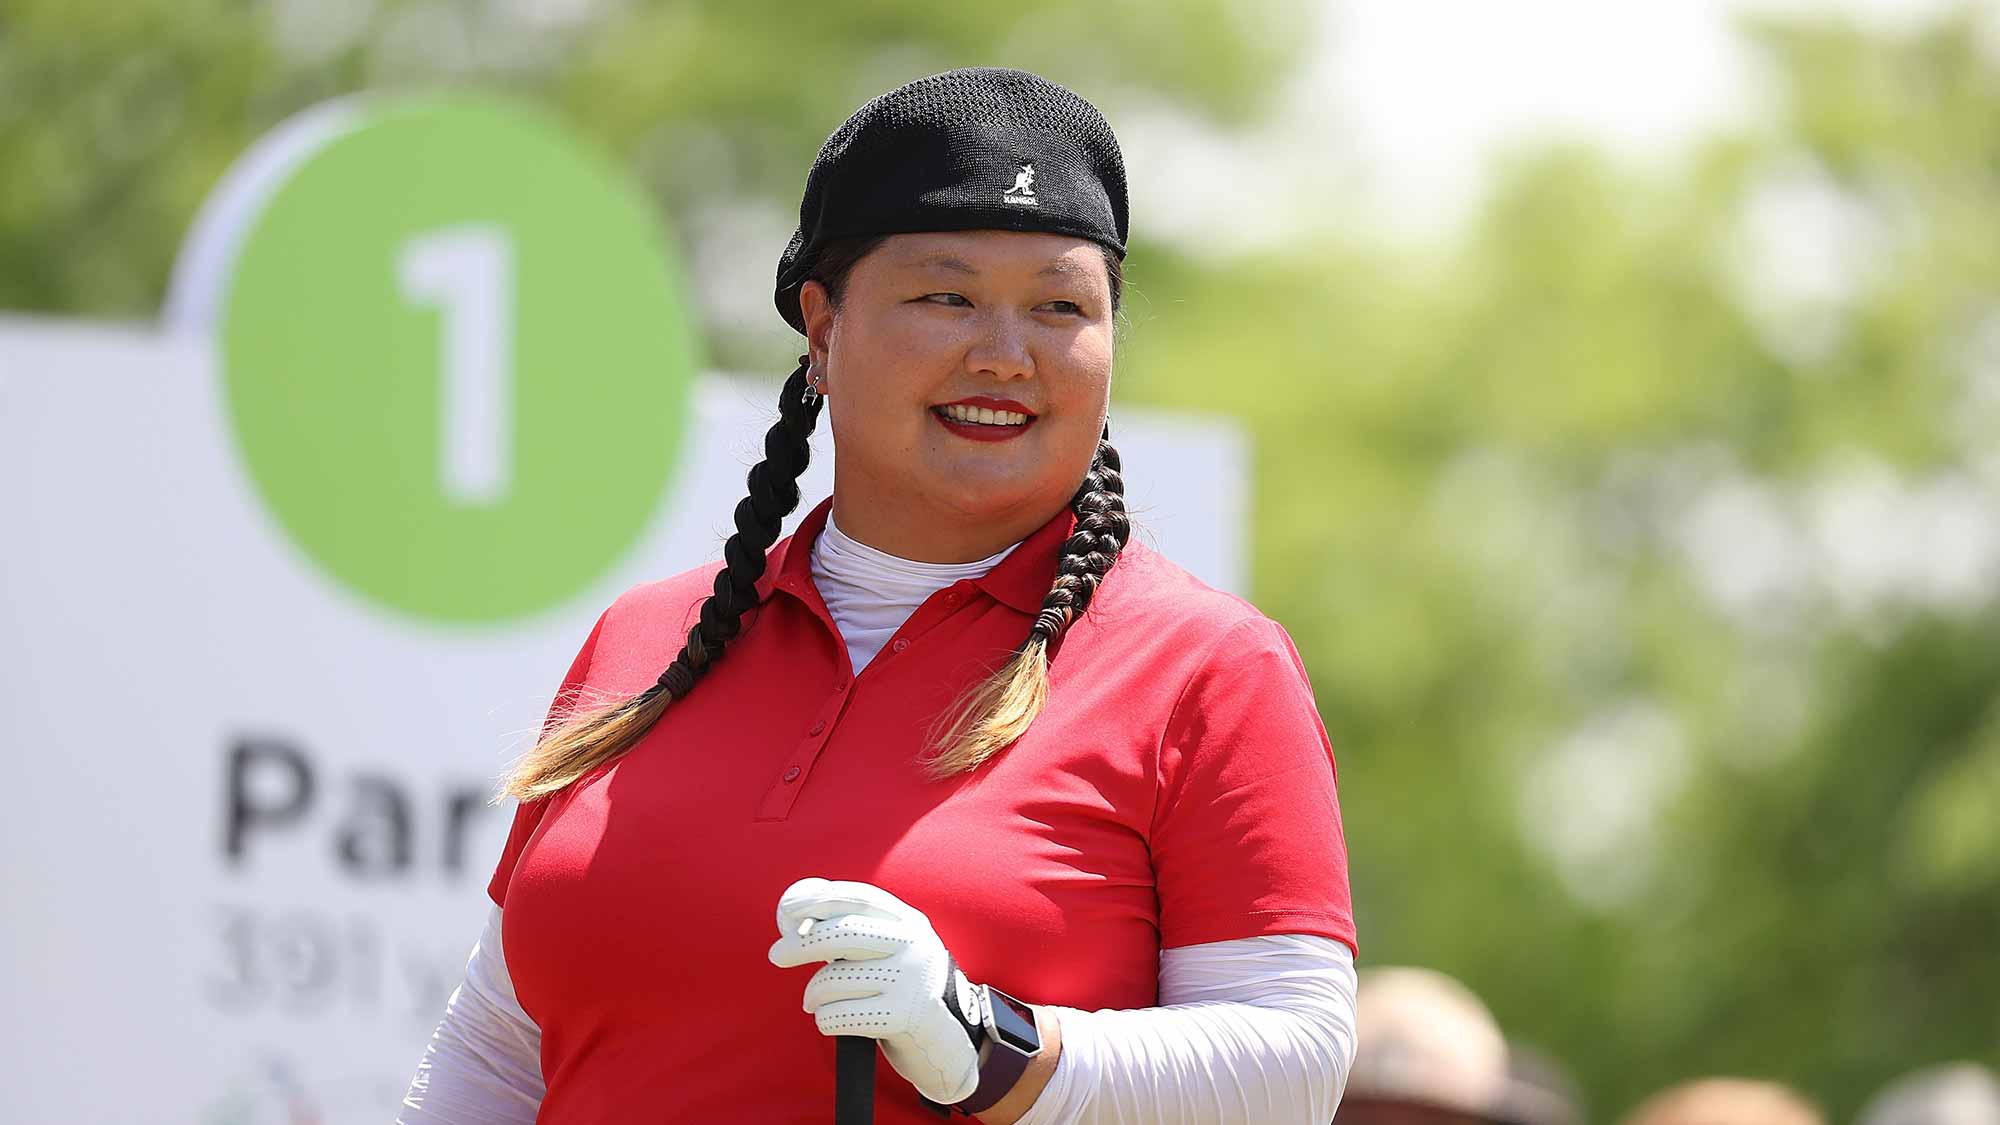 Christina Kim from the United States gets ready to start the final round of the LPGA Volvik Championship